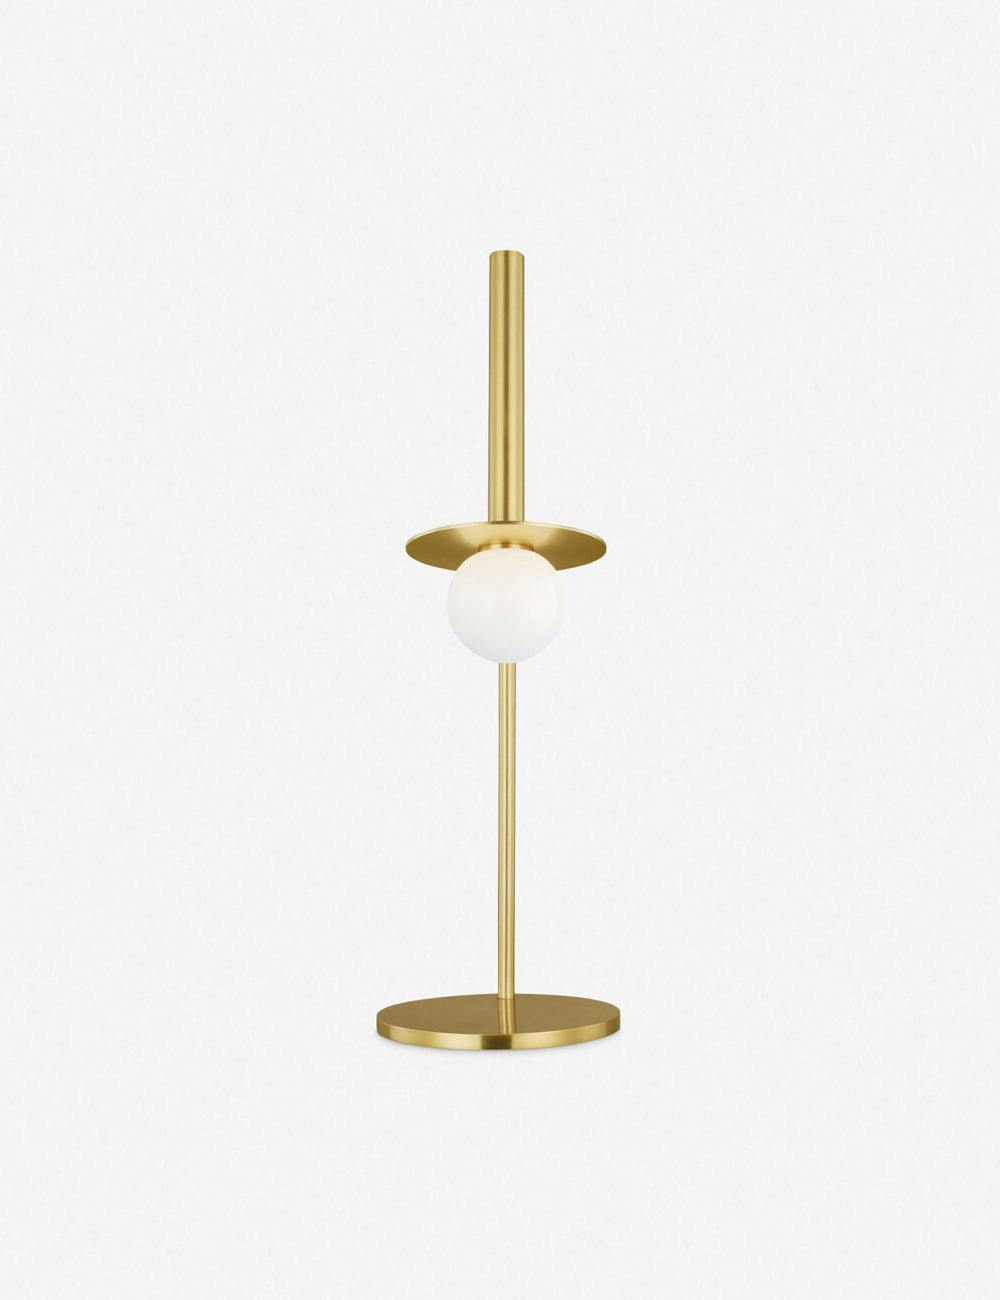 Nodes Table Lamp by Kelly Wearstler - Burnished Brass